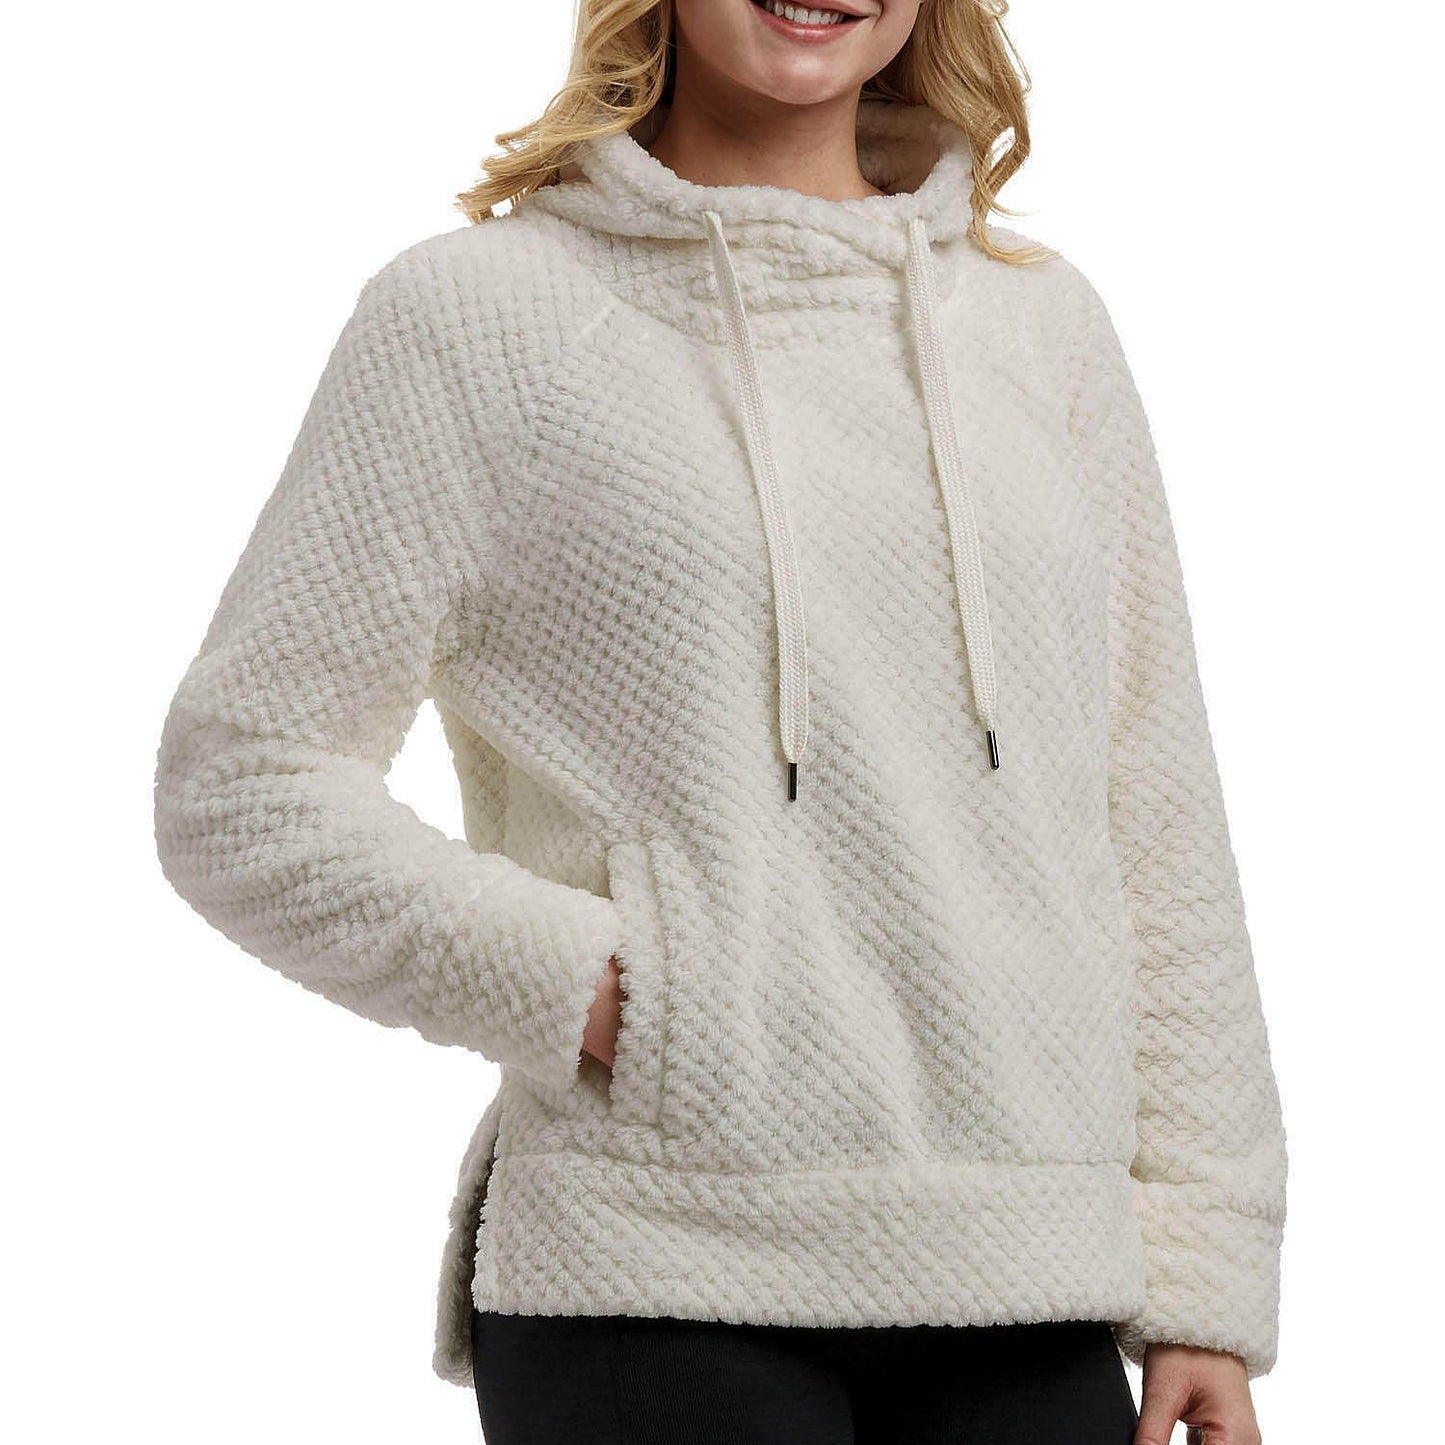 Member's Mark Women's Textured Plush Pullover Cowlneck Top